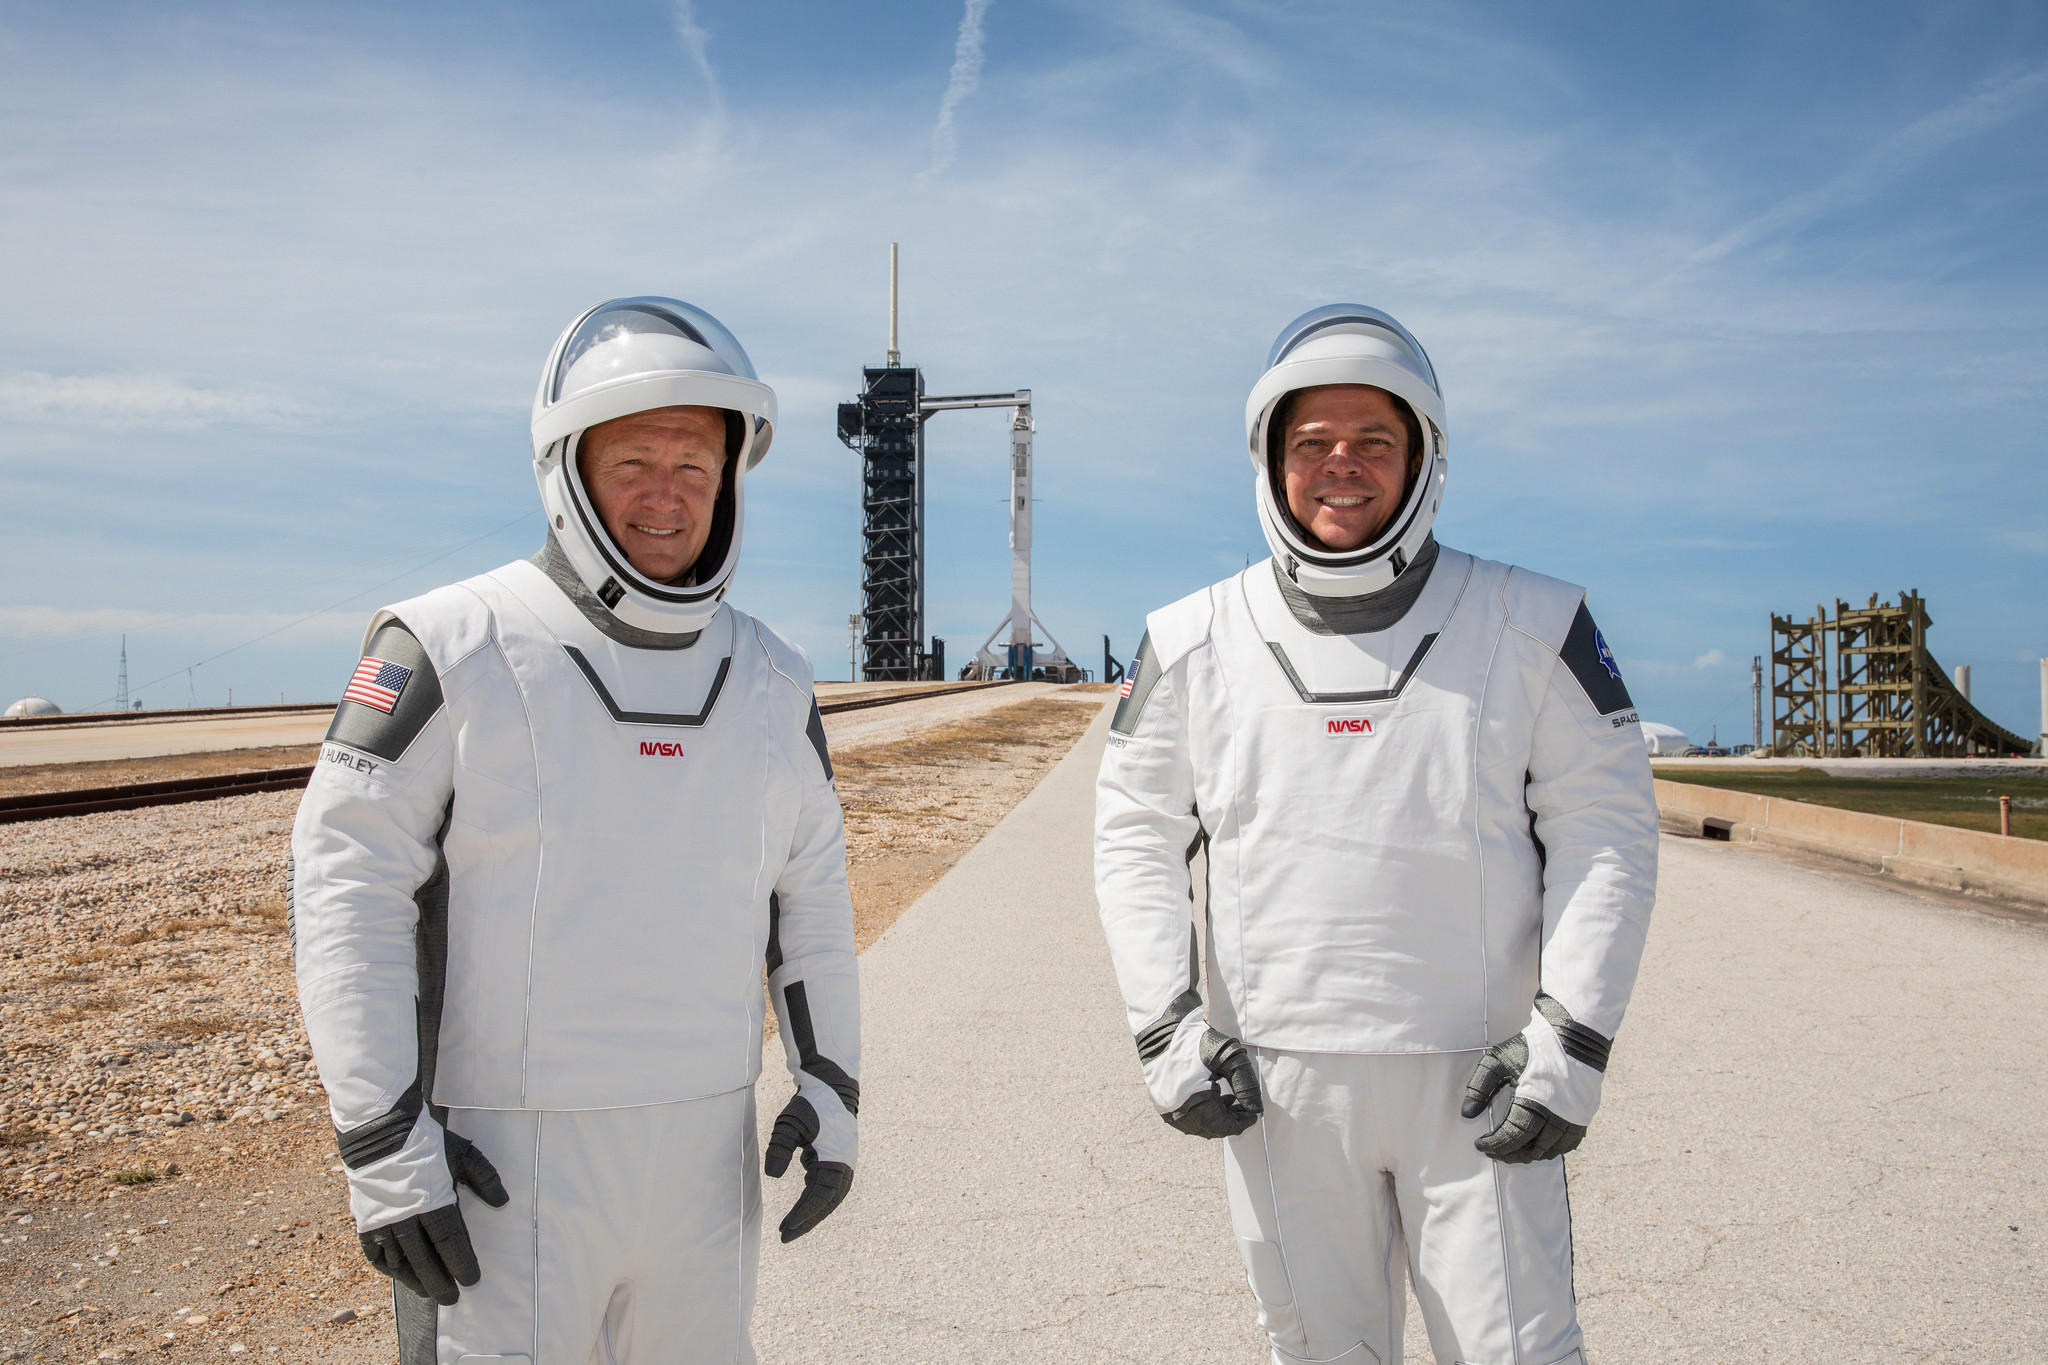 NASA astronauts Douglas Hurley (left) and Robert Behnken (right) participate in a dress rehearsal for launch